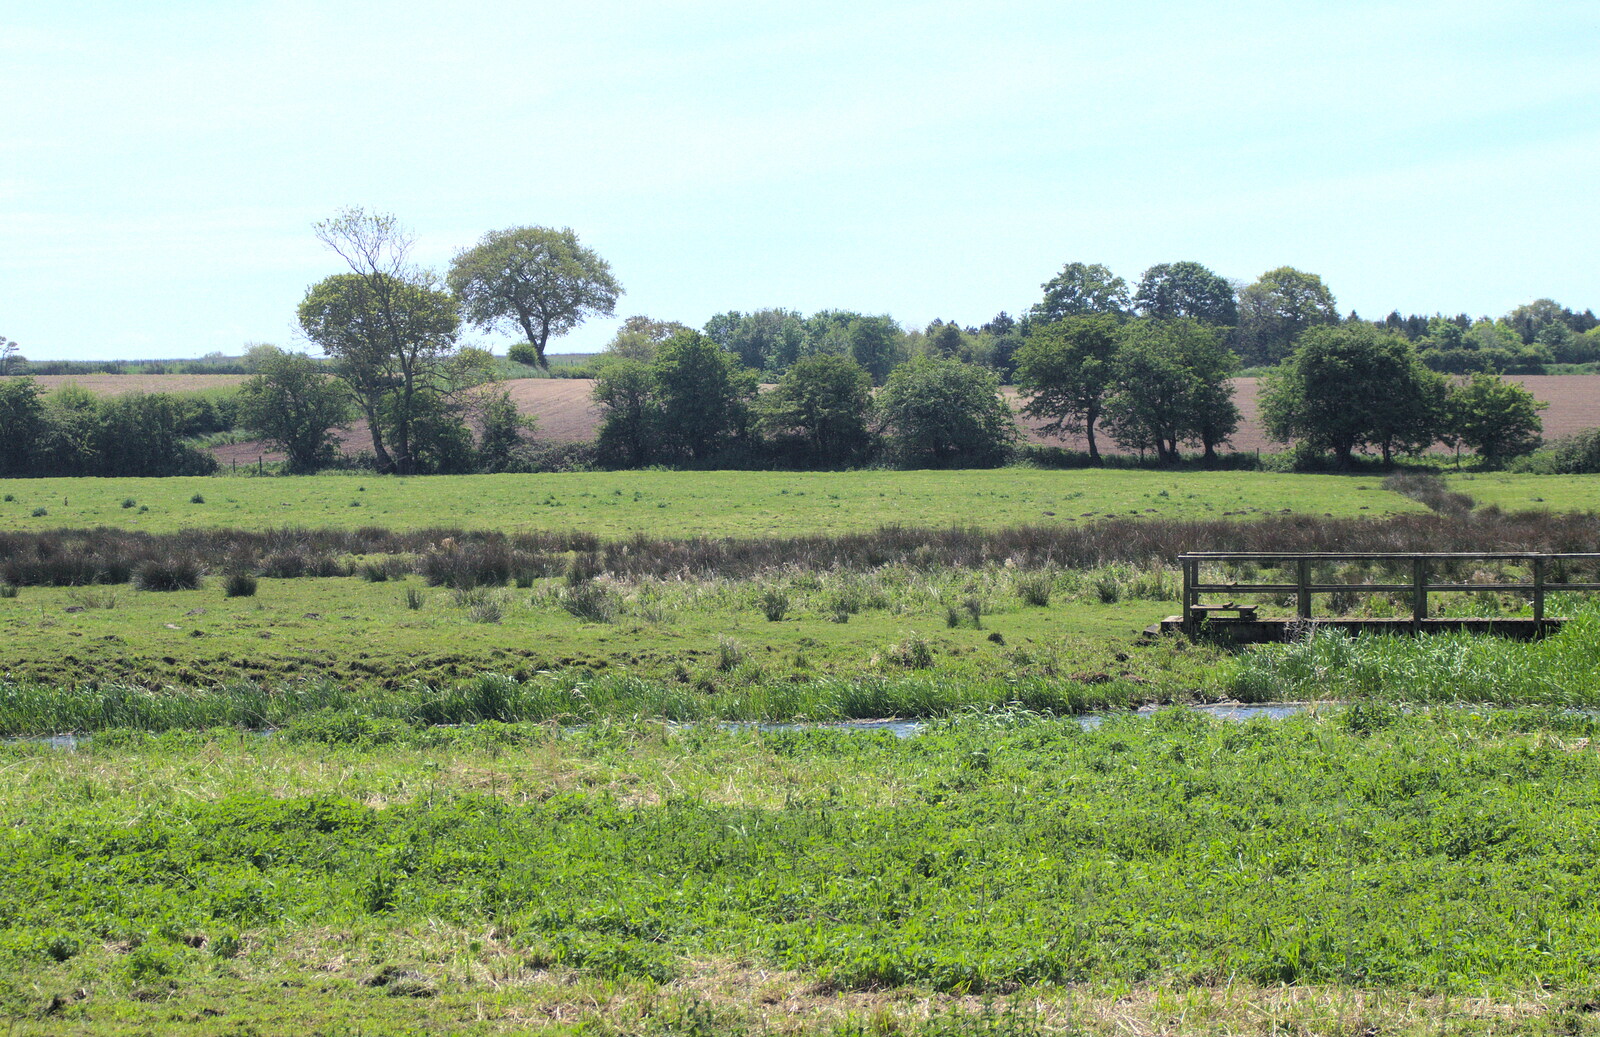 The river valley near Brampton from The Bure Valley Railway, Aylsham, Norfolk - 26th May 2013